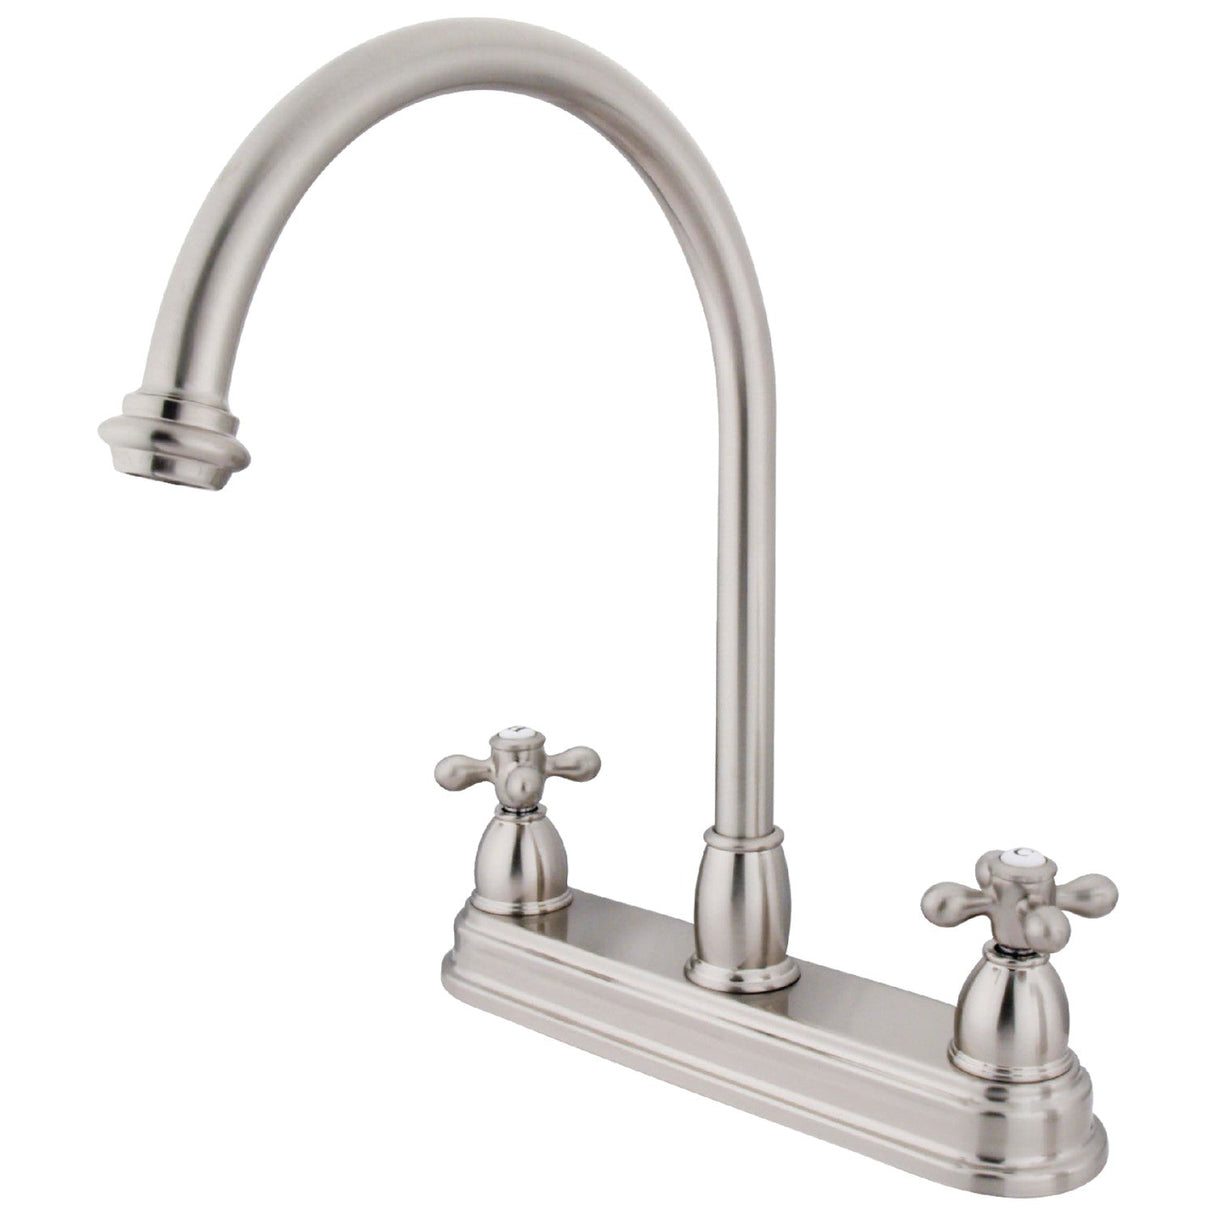 Restoration KB3748AX Two-Handle 3-Hole Deck Mount 8" Centerset Kitchen Faucet, Brushed Nickel